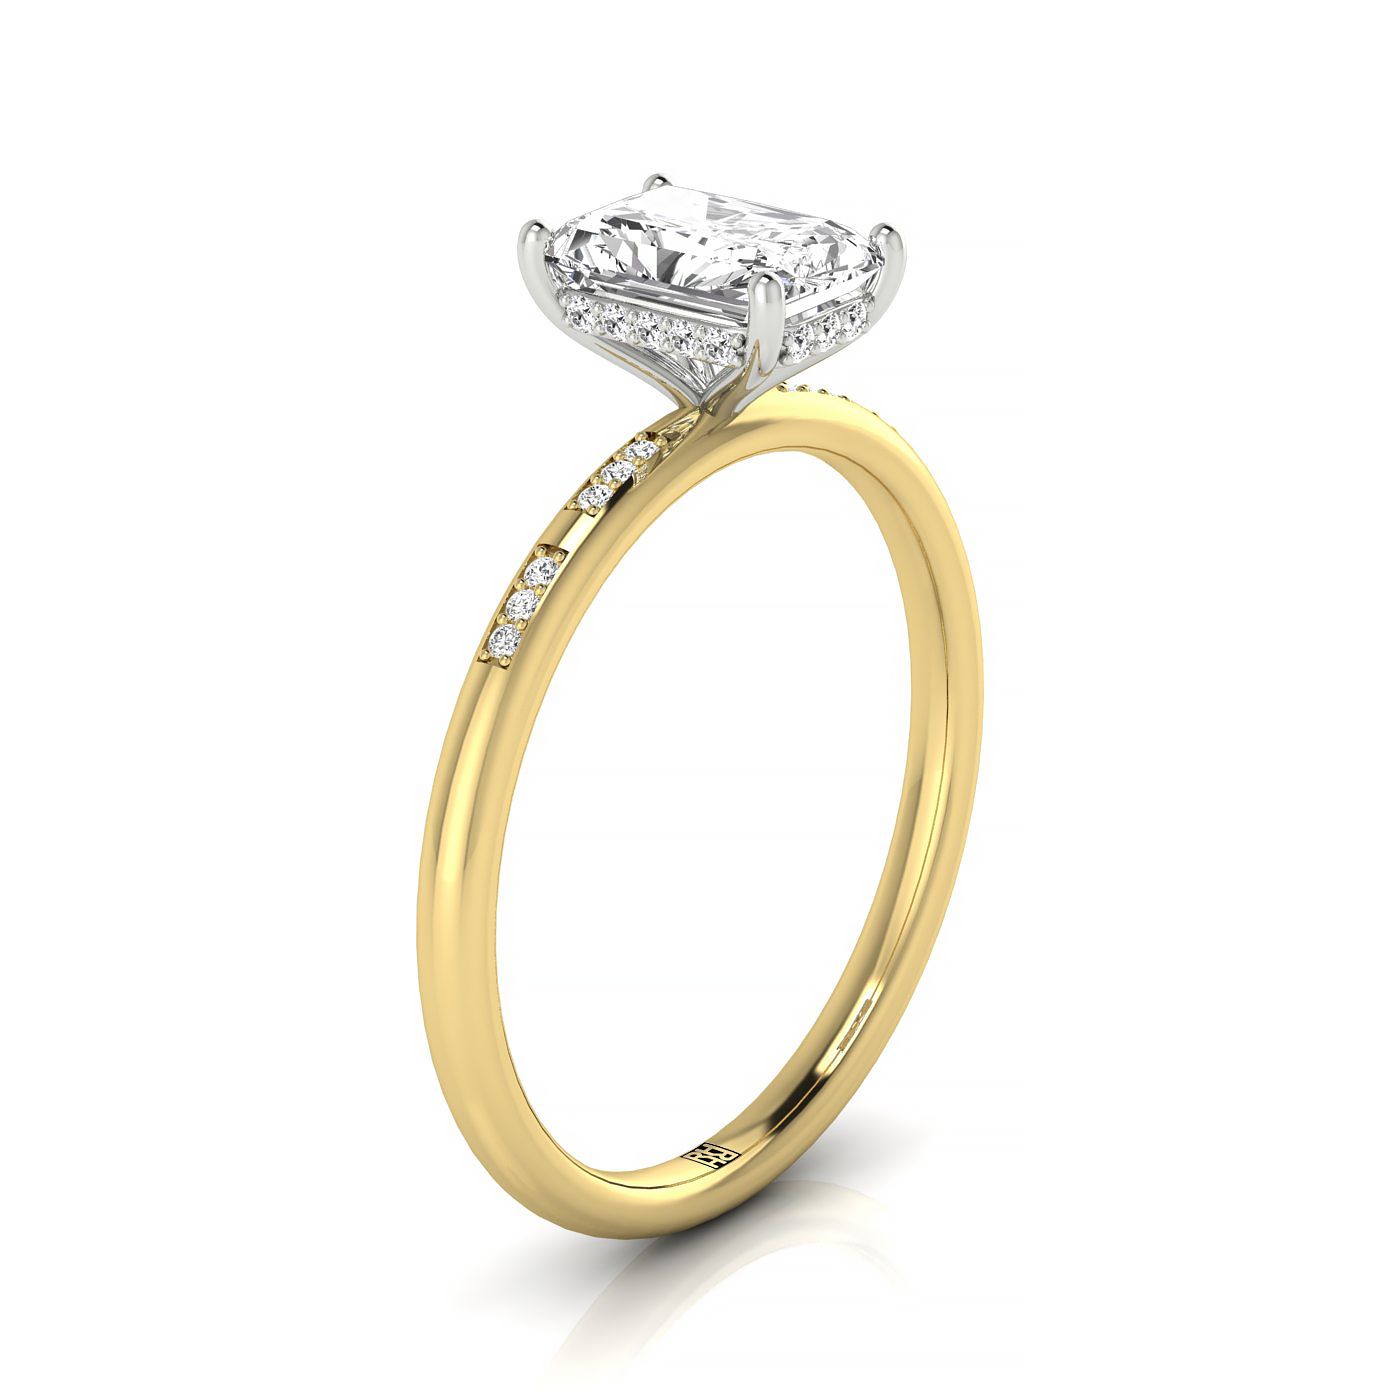 18ky Radiant Engagement Ring With High Hidden Halo With 36 Prong Set Round Diamonds